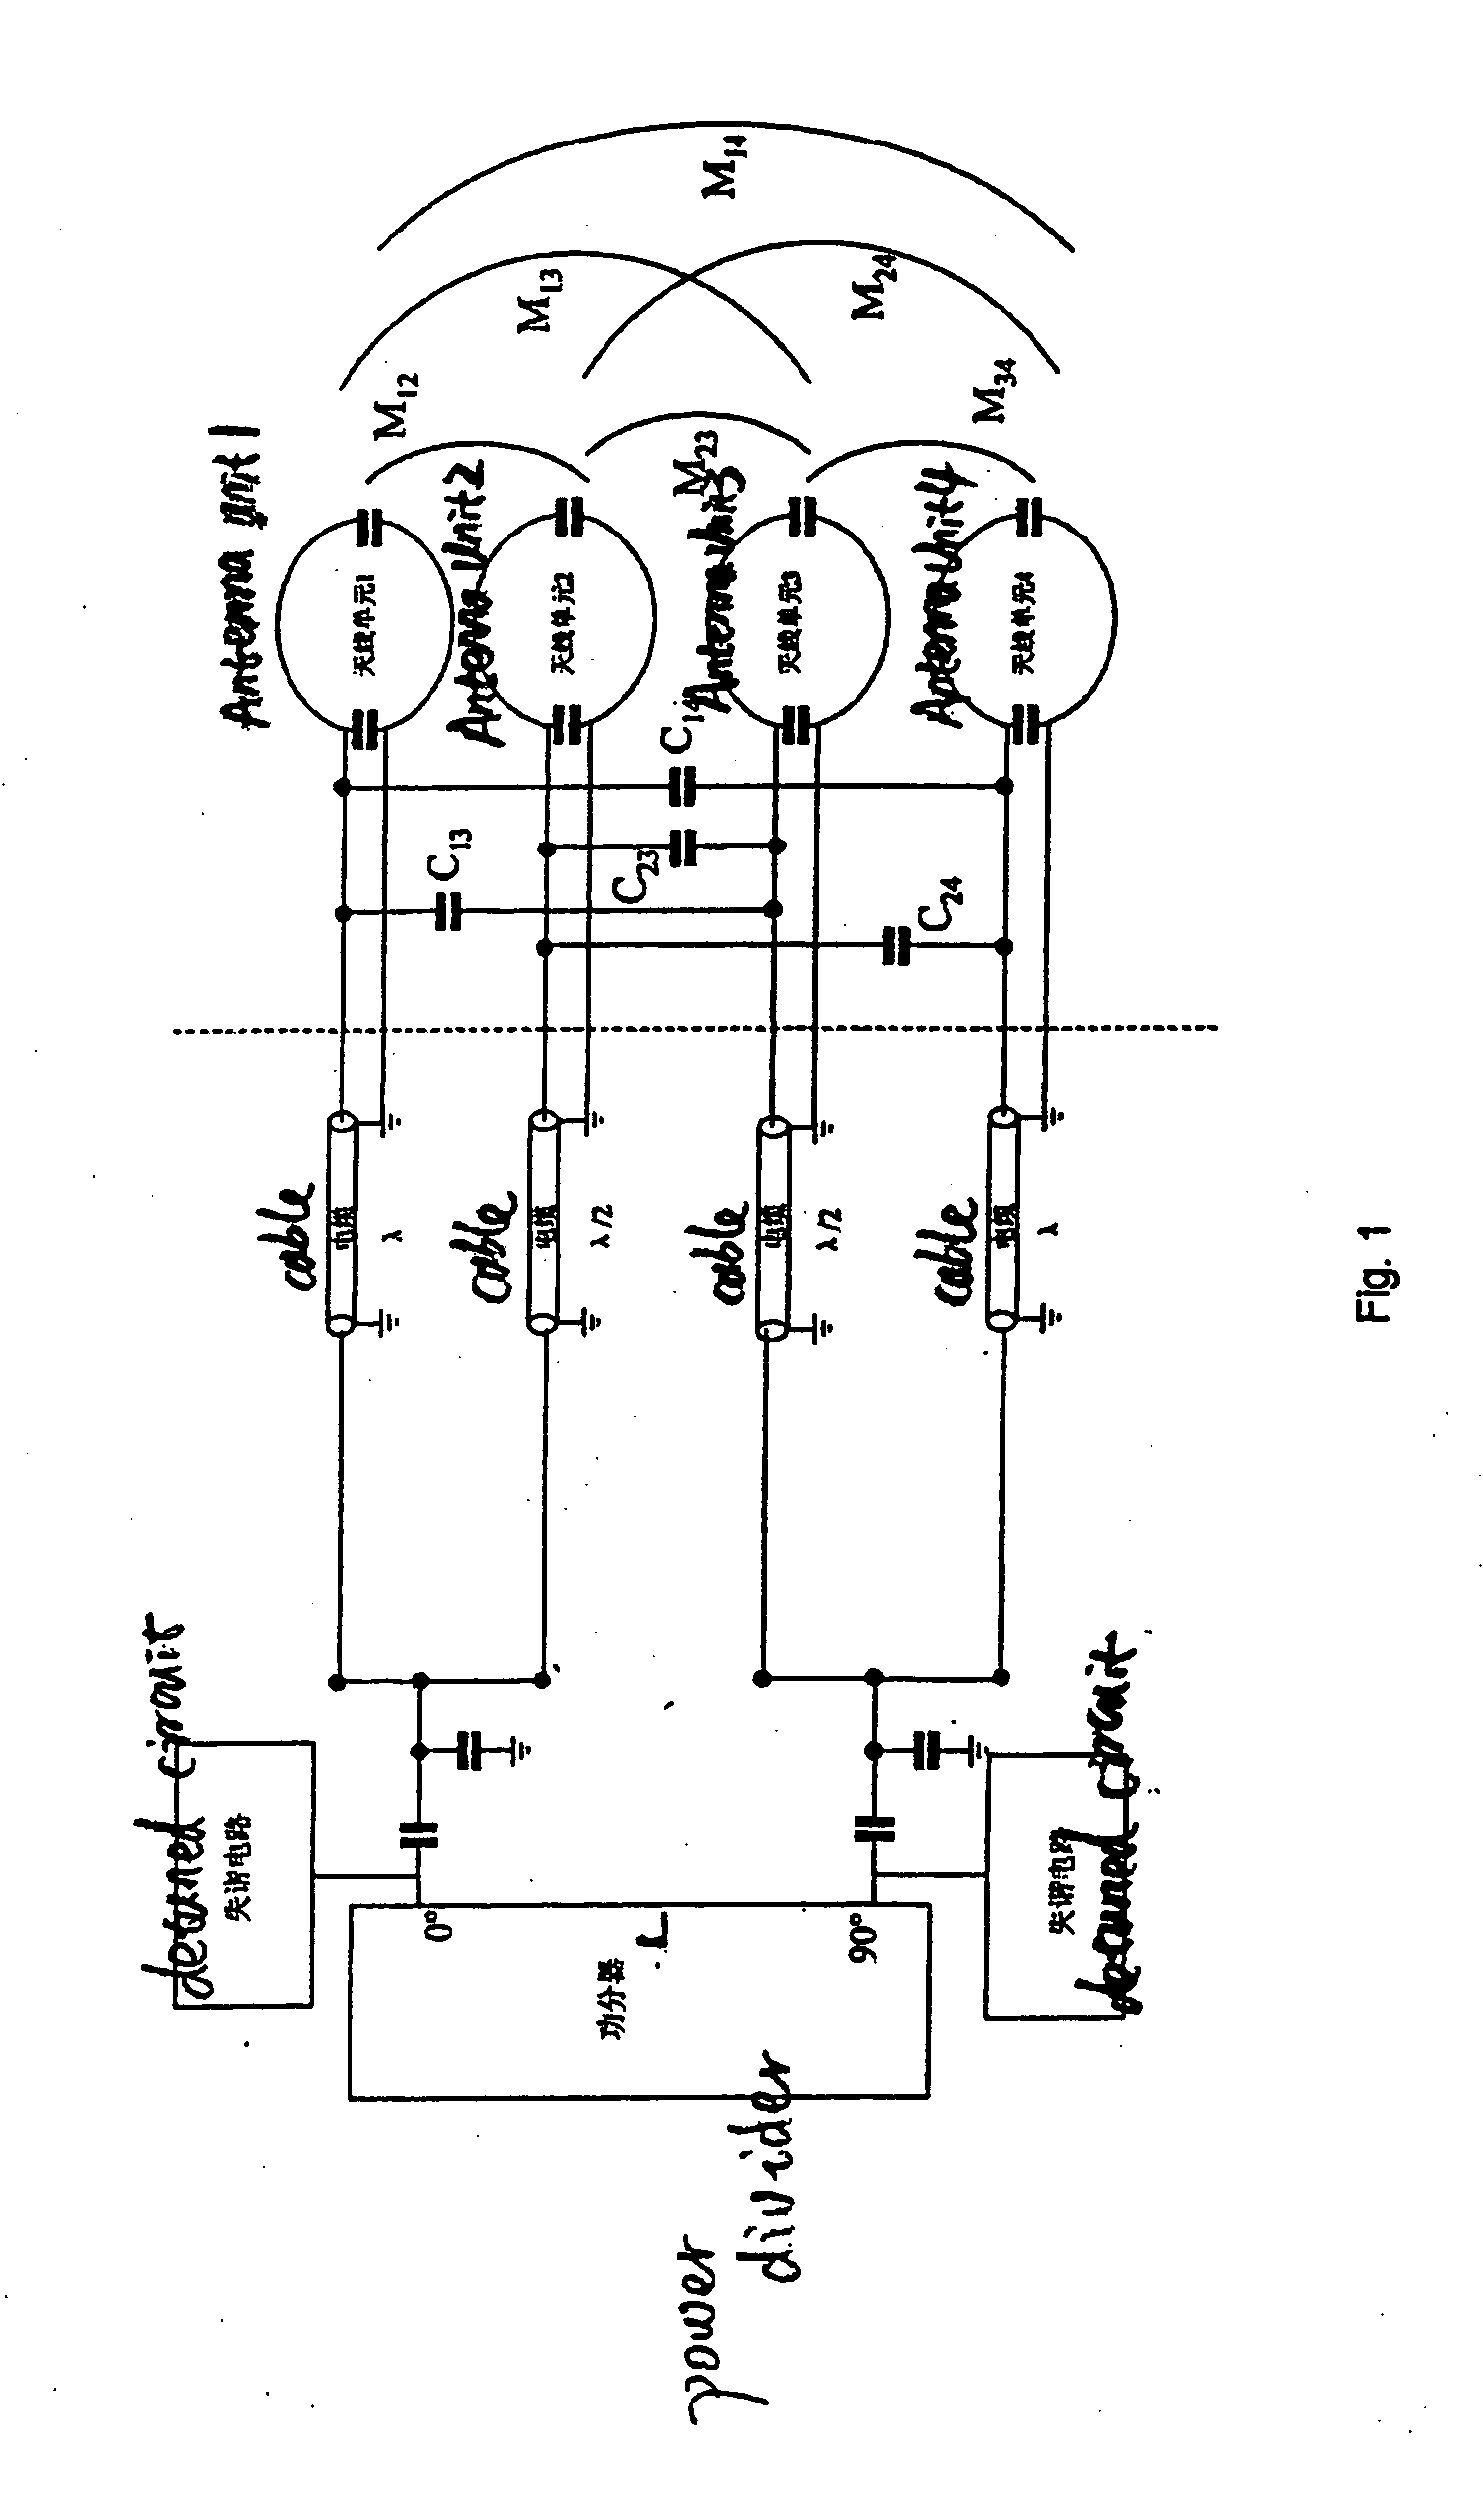 Method for developing a transmit coil of a magnetic resonance system